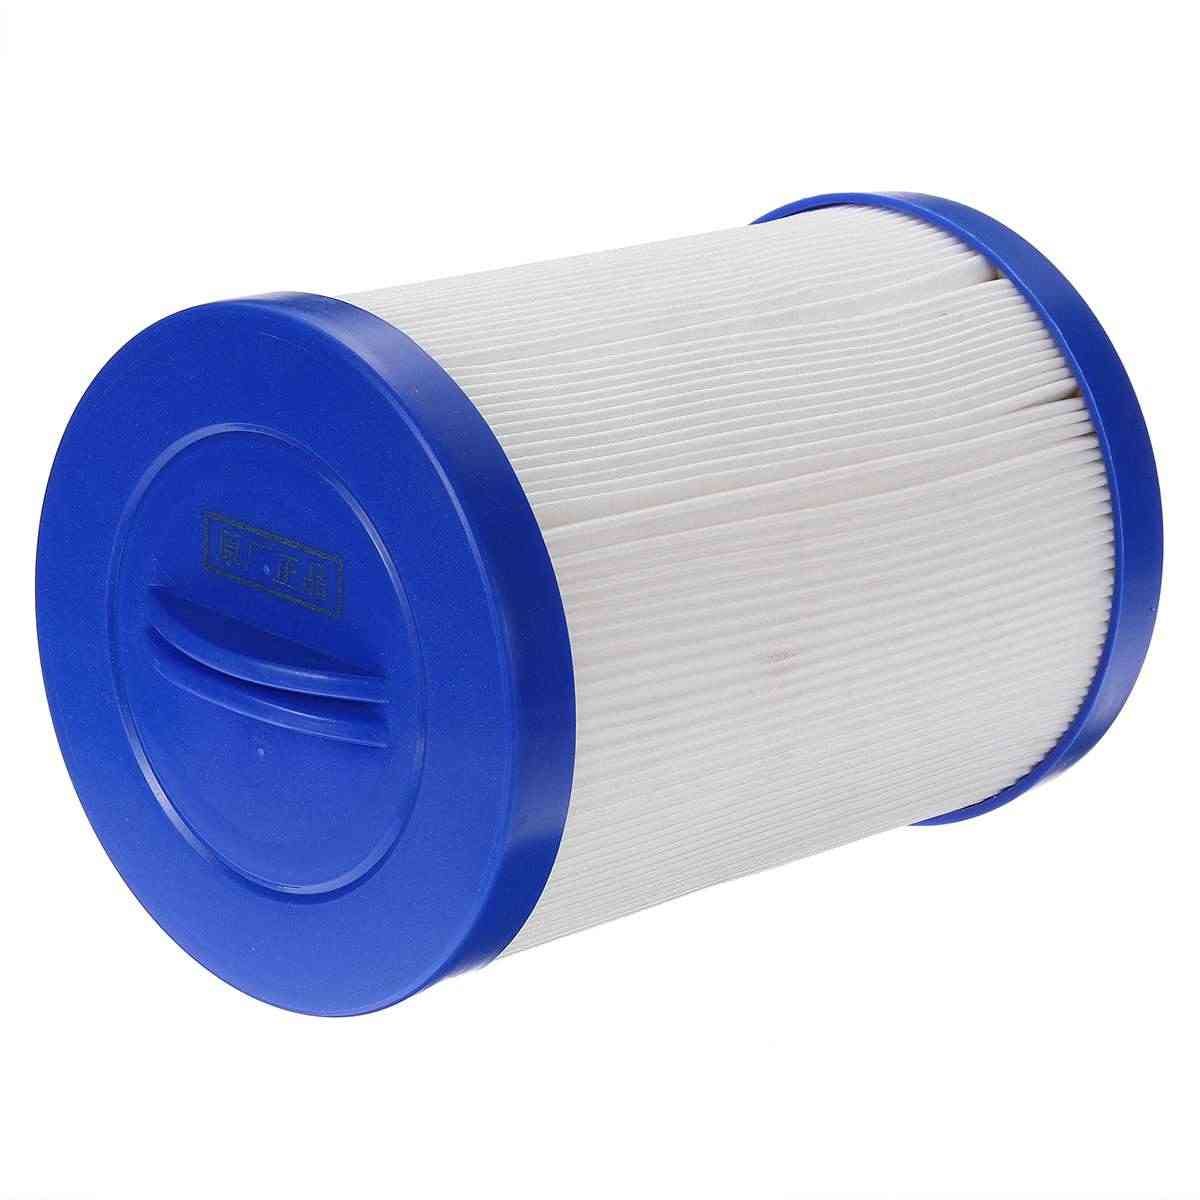 Pww50 6ch-940 Hot Tub Filter For Spa Tubs